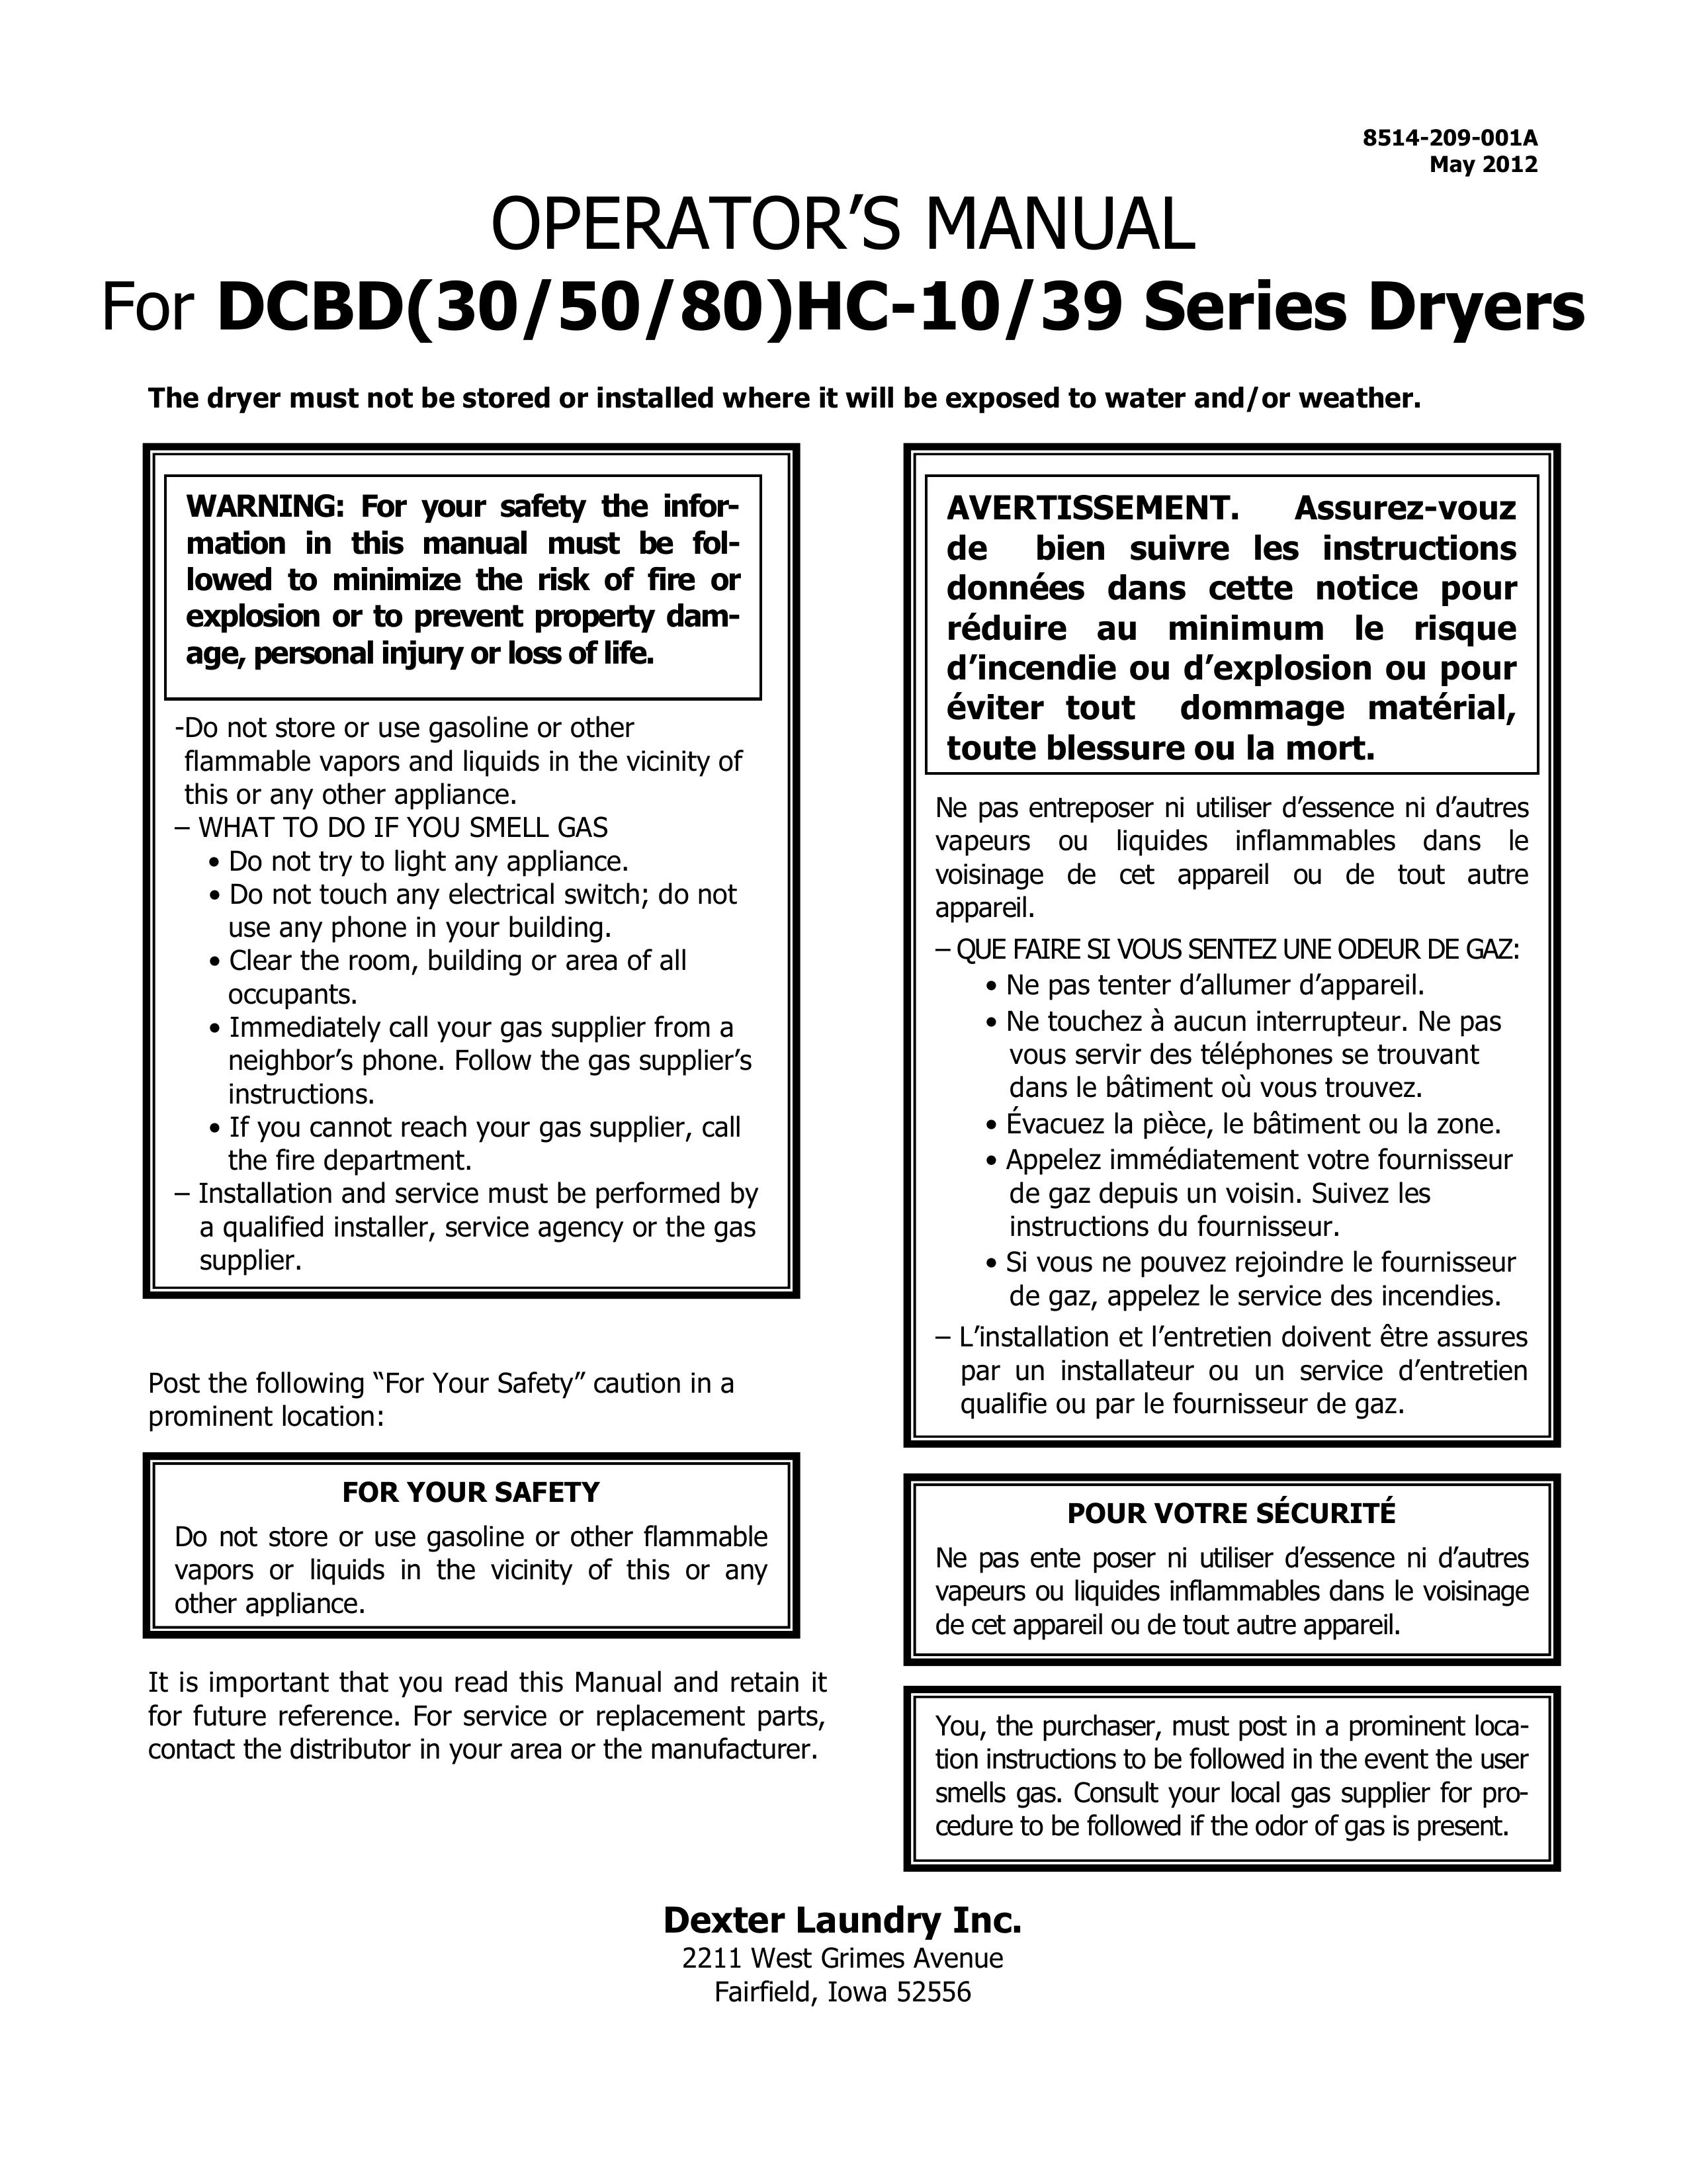 MRV Communications HC-39 Clothes Dryer User Manual